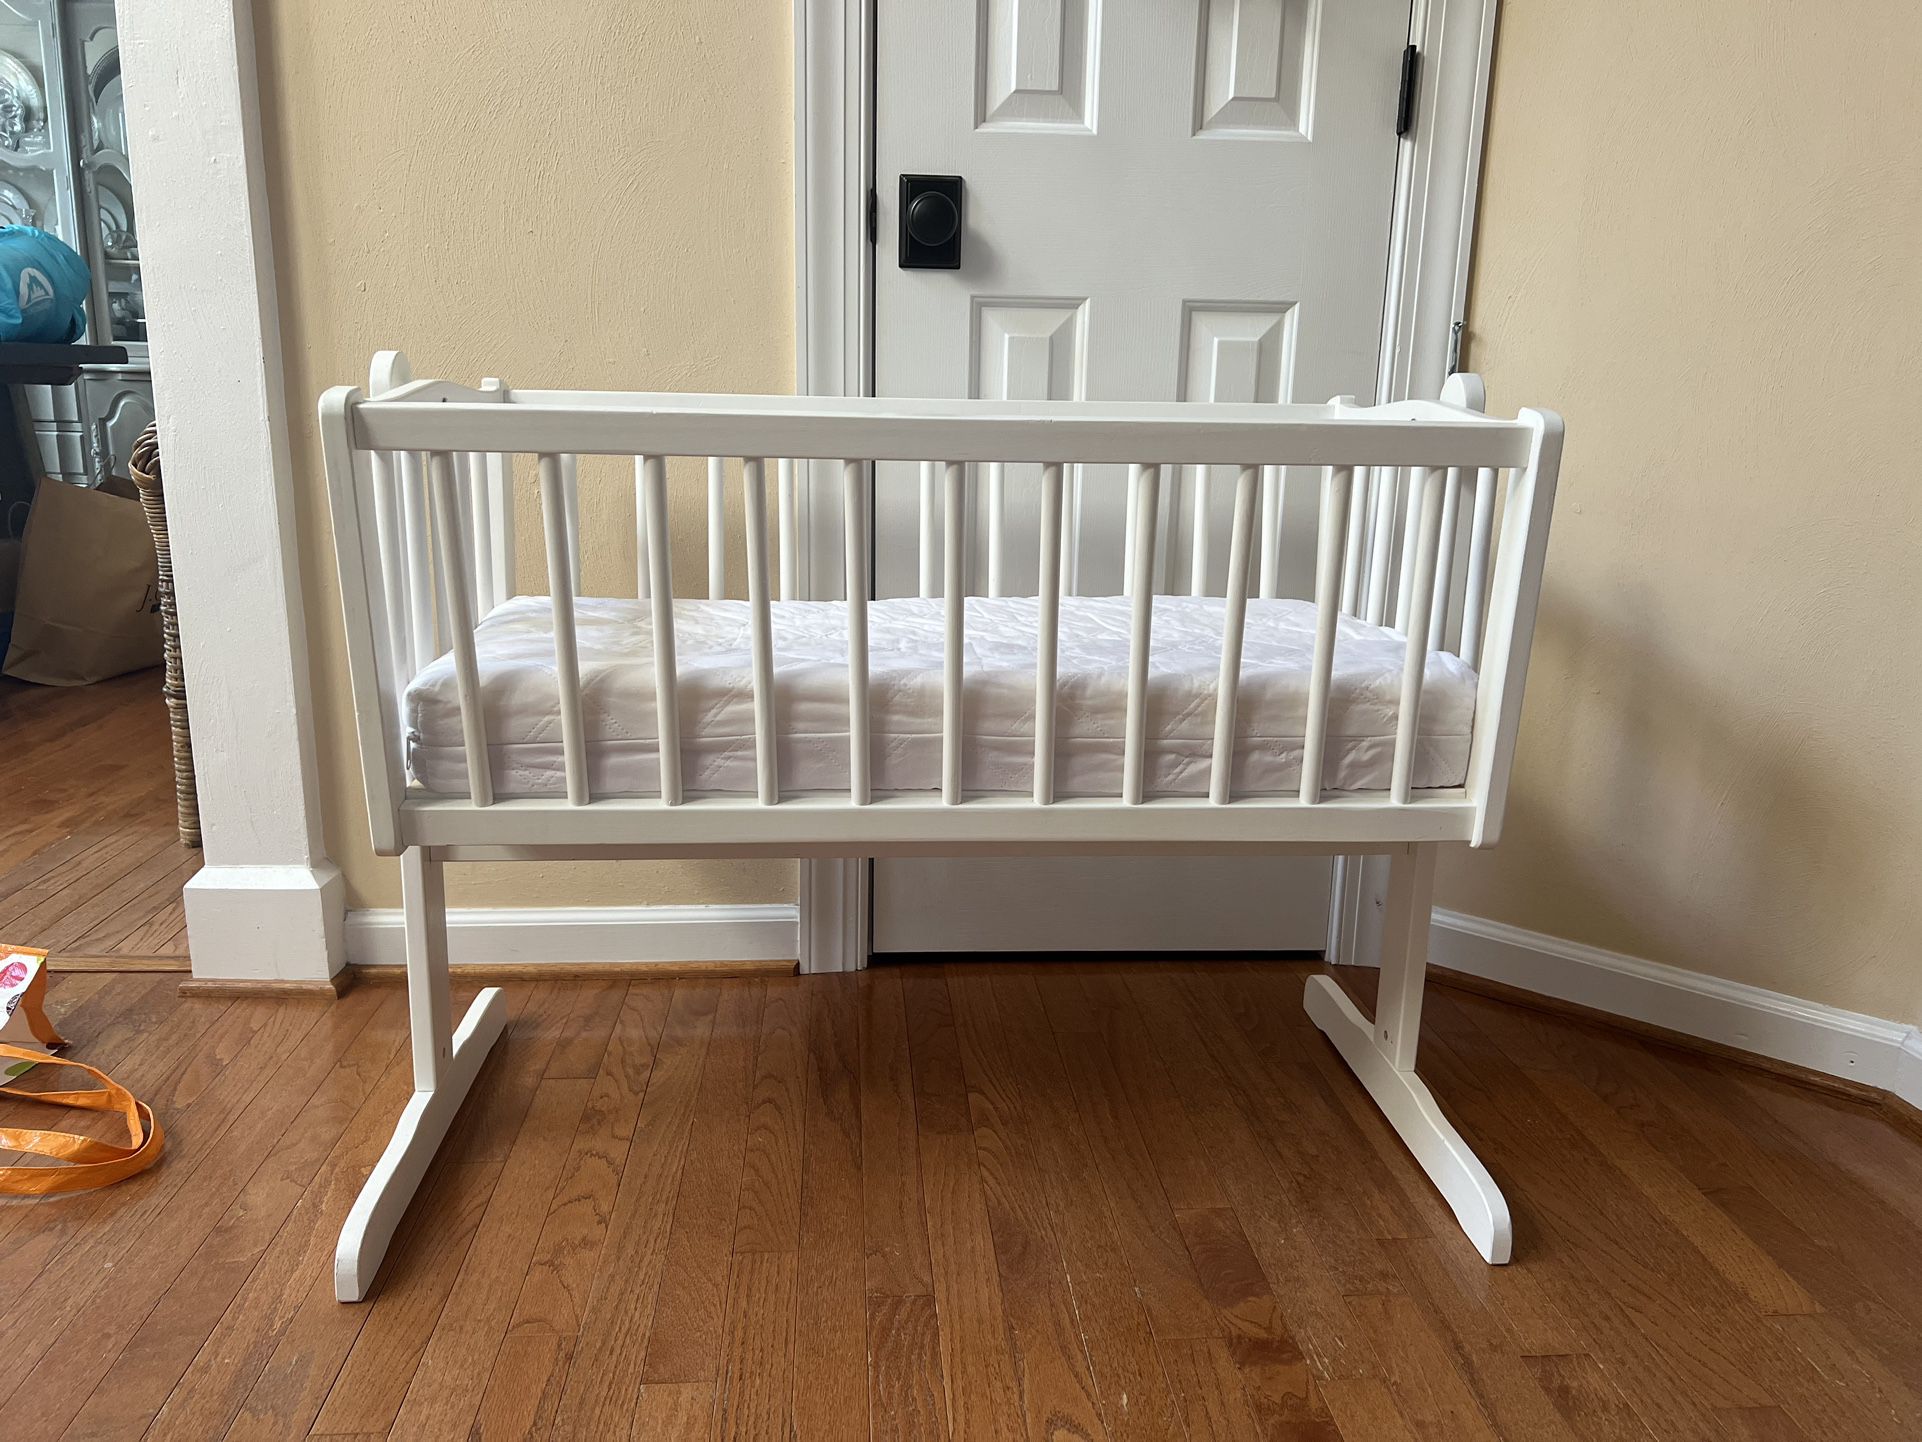 Baby / Infant cradle Or Crib 